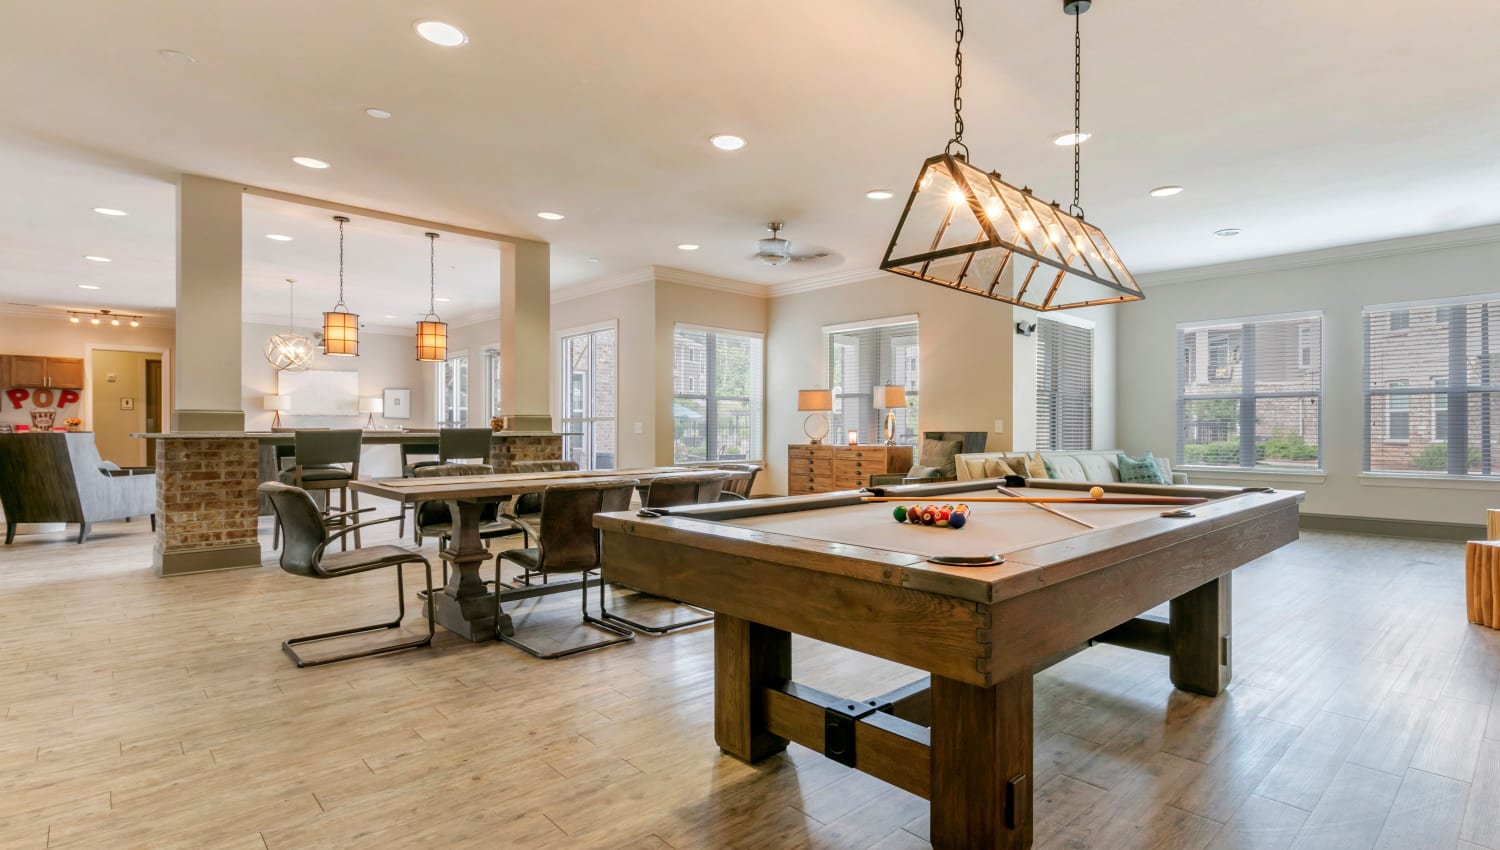 Game room with a billiards table at The Village at Apison Pike in Ooltewah, Tennessee